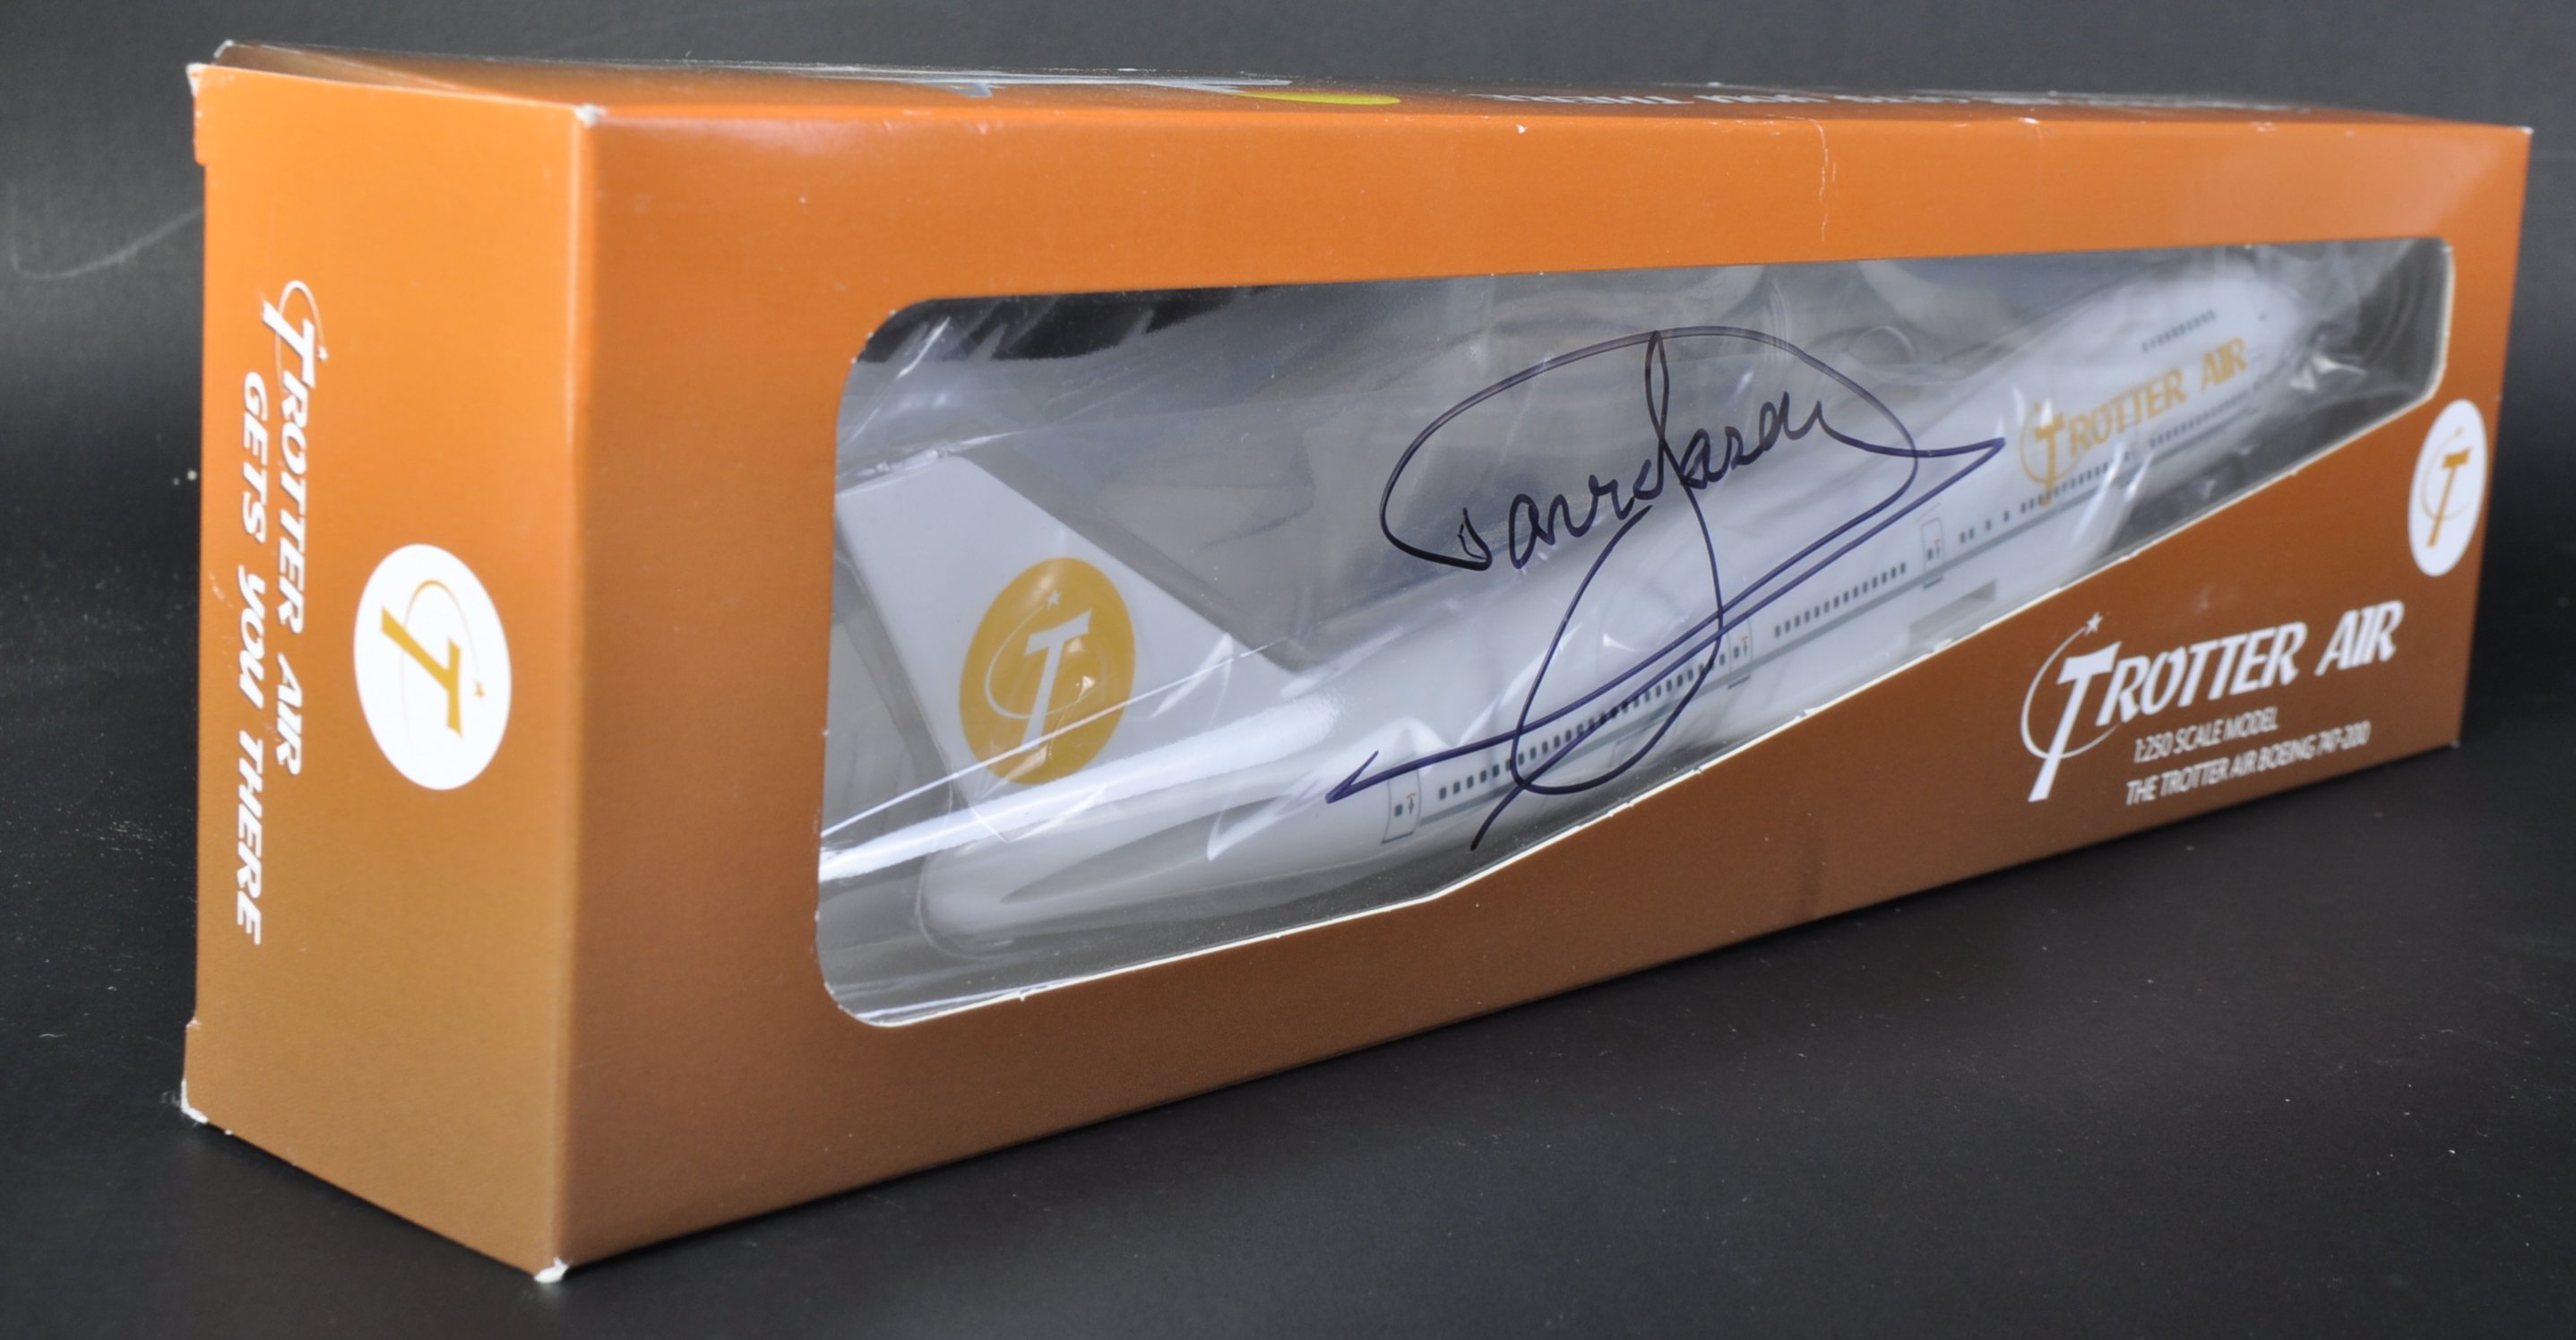 ONLY FOOLS & HORSES - TROTTER AIR DIECAST MODEL - DAVID JASON SIGNED - Image 3 of 6